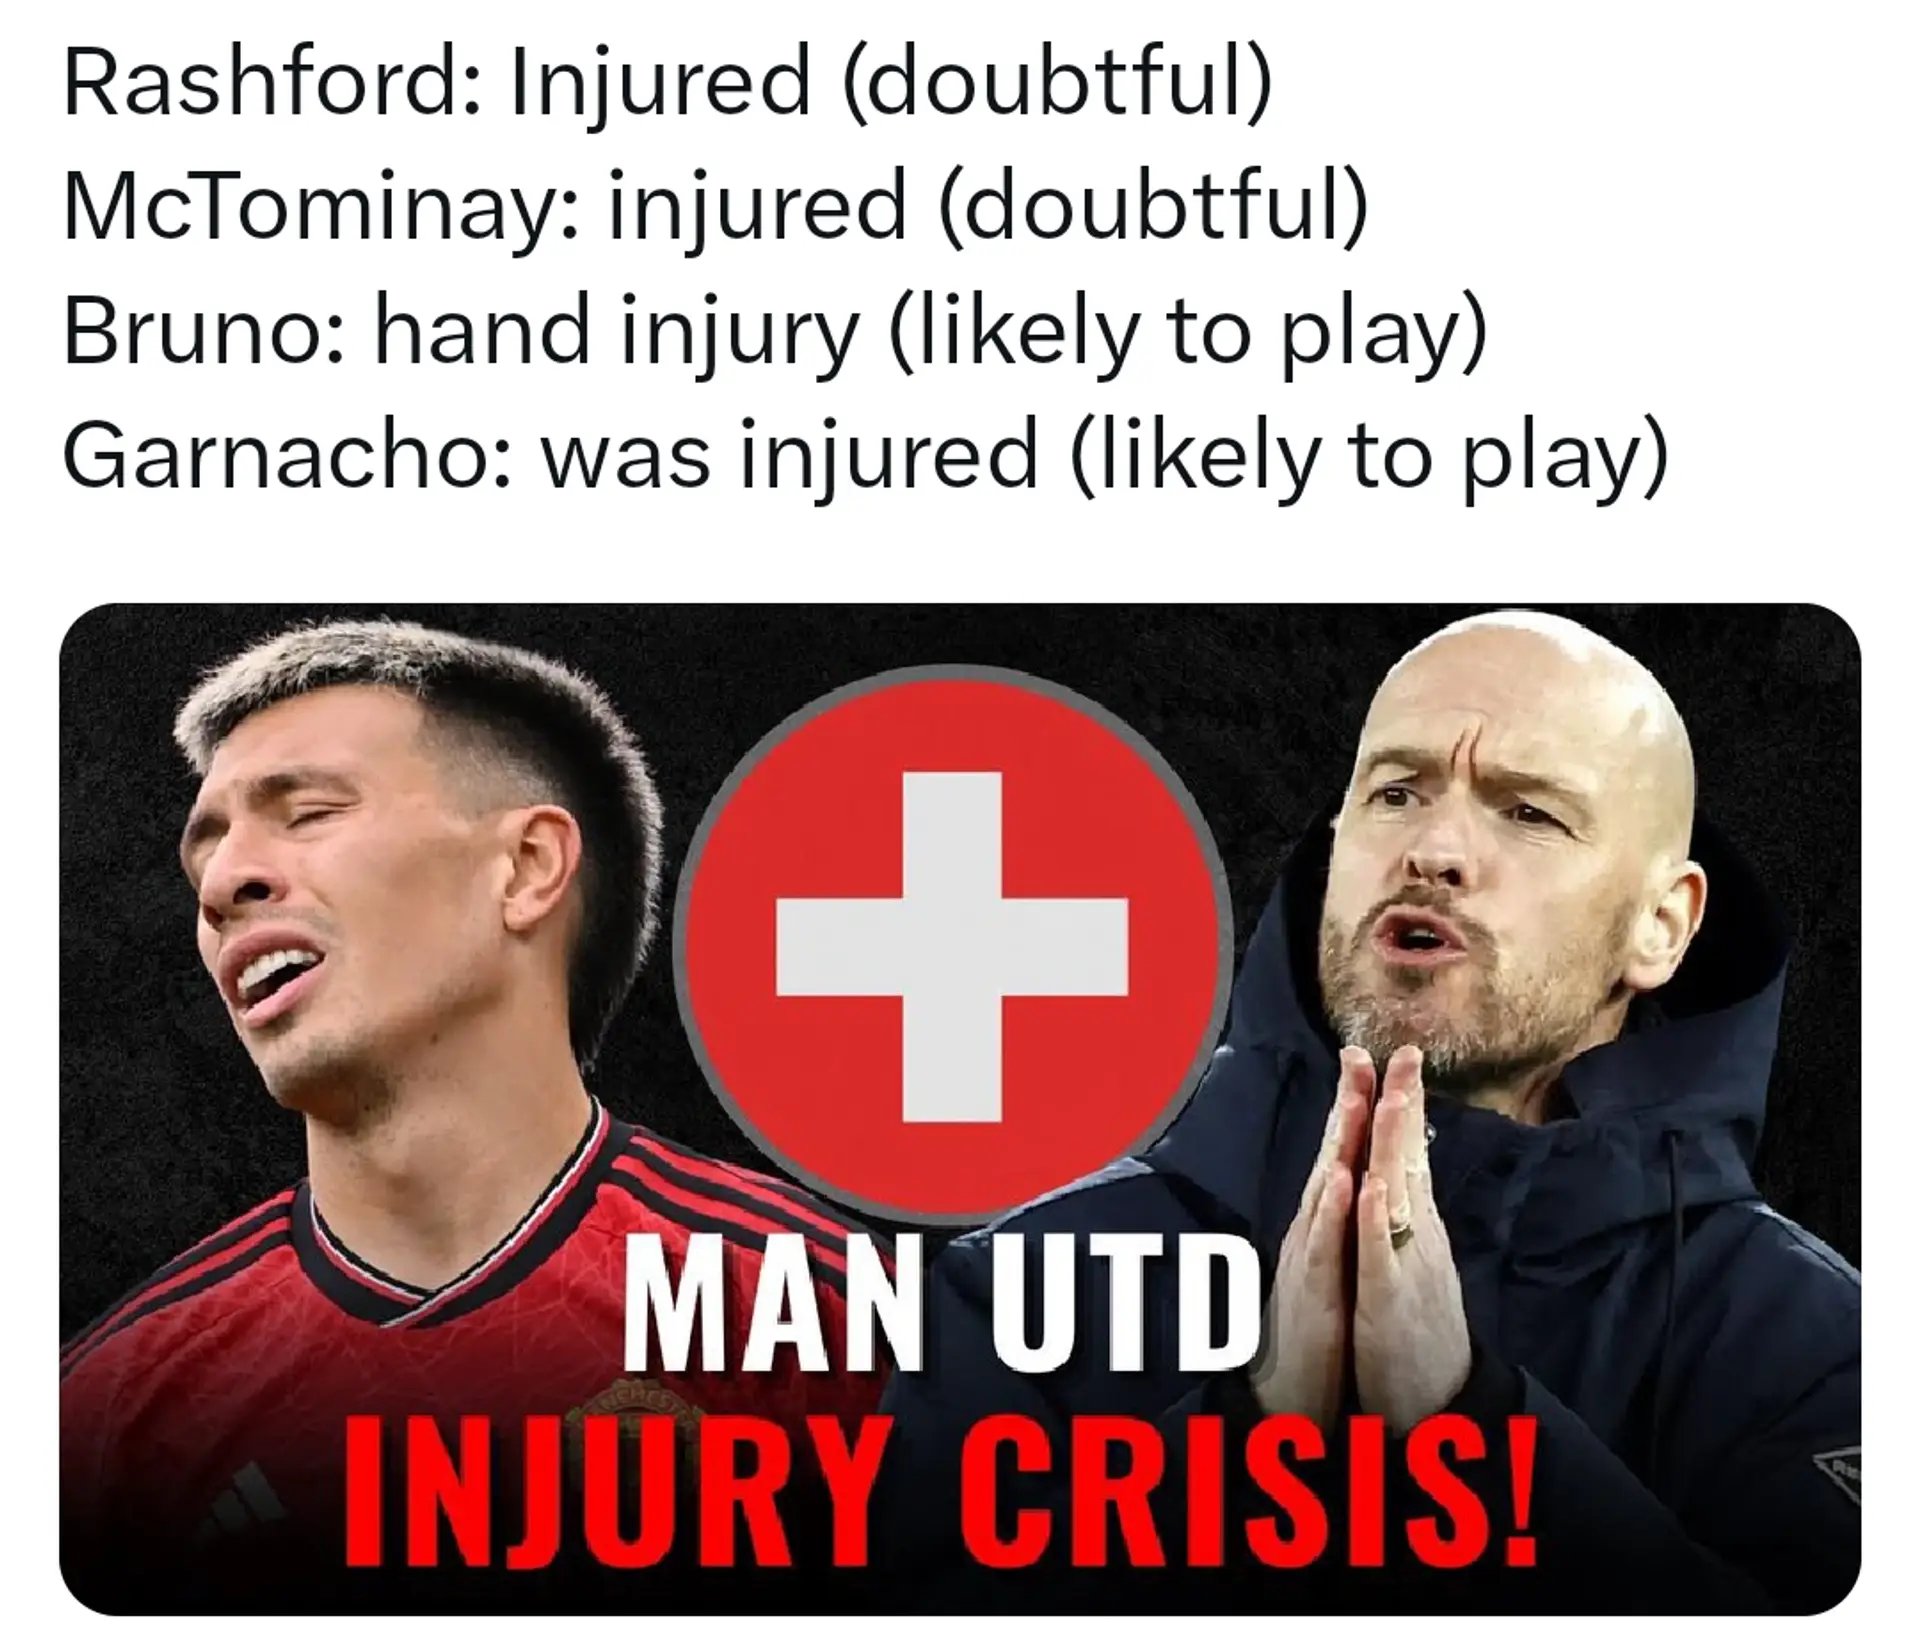 MUFC INJURY CRISIS CONTINUES!